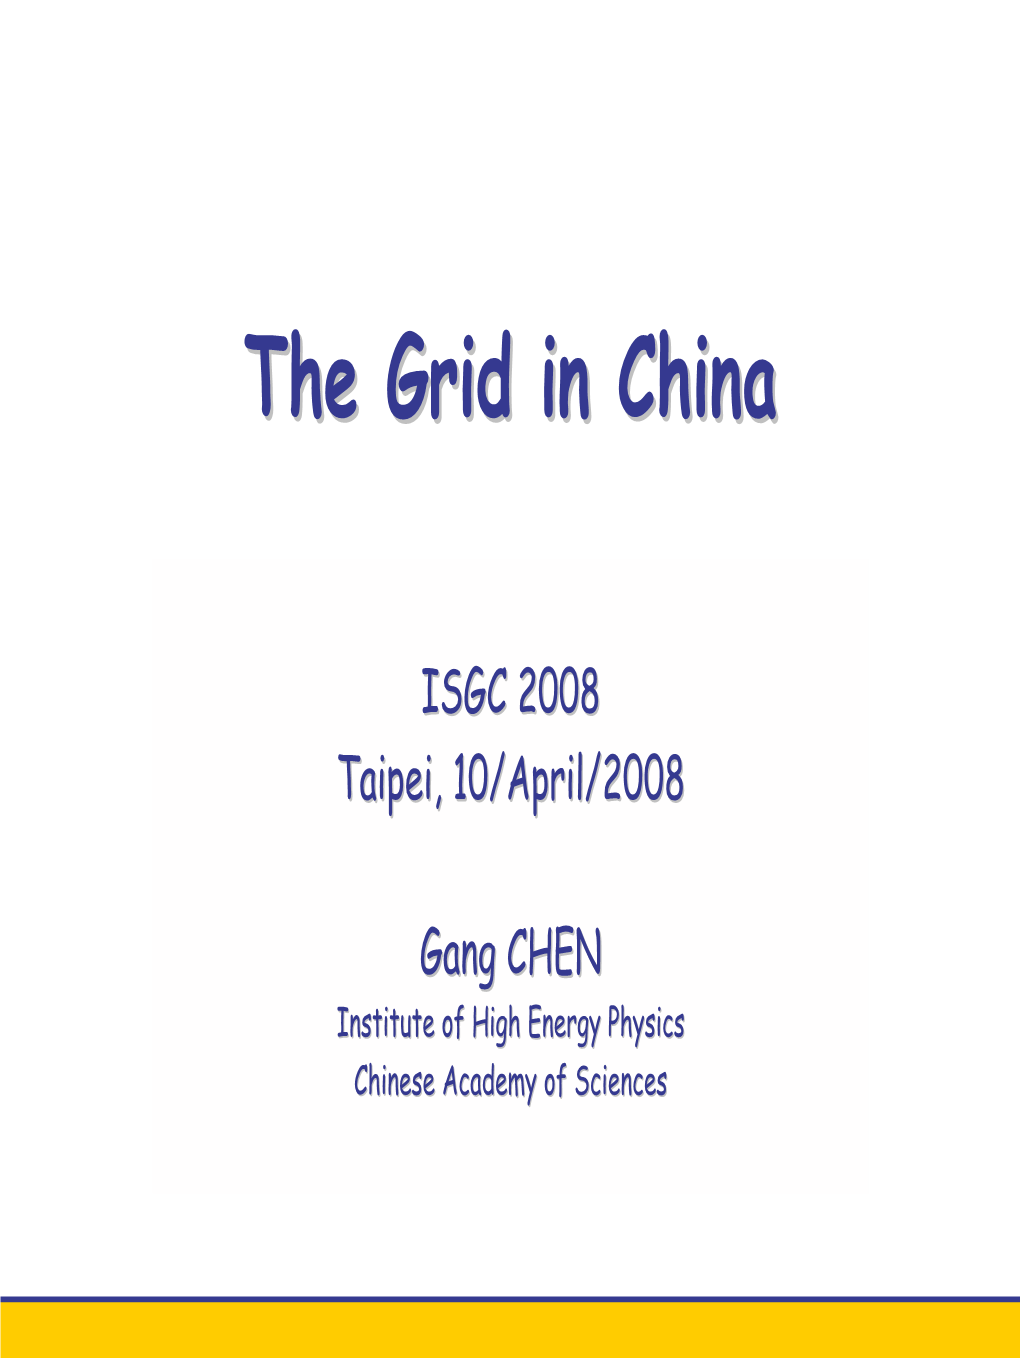 The Grid in China